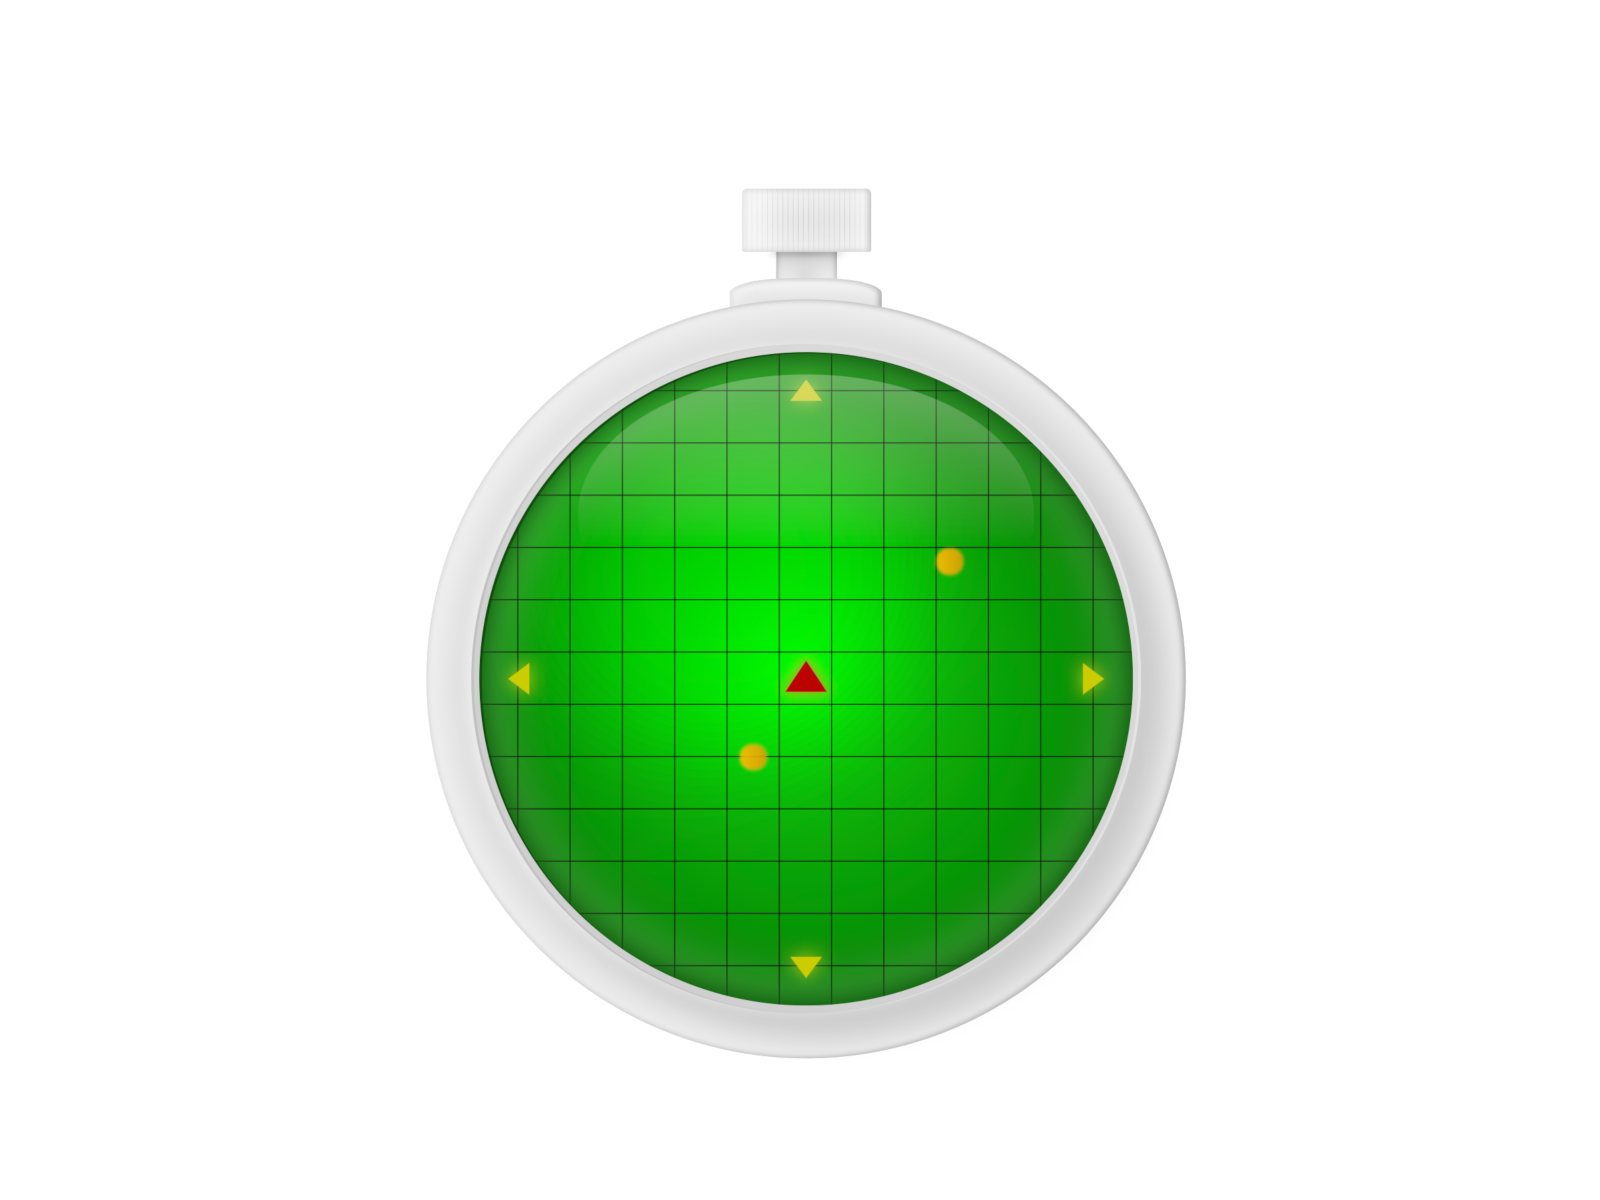 Cartoon of a dragon radar: a rounded object with a screen showing coordinates and blinking lights